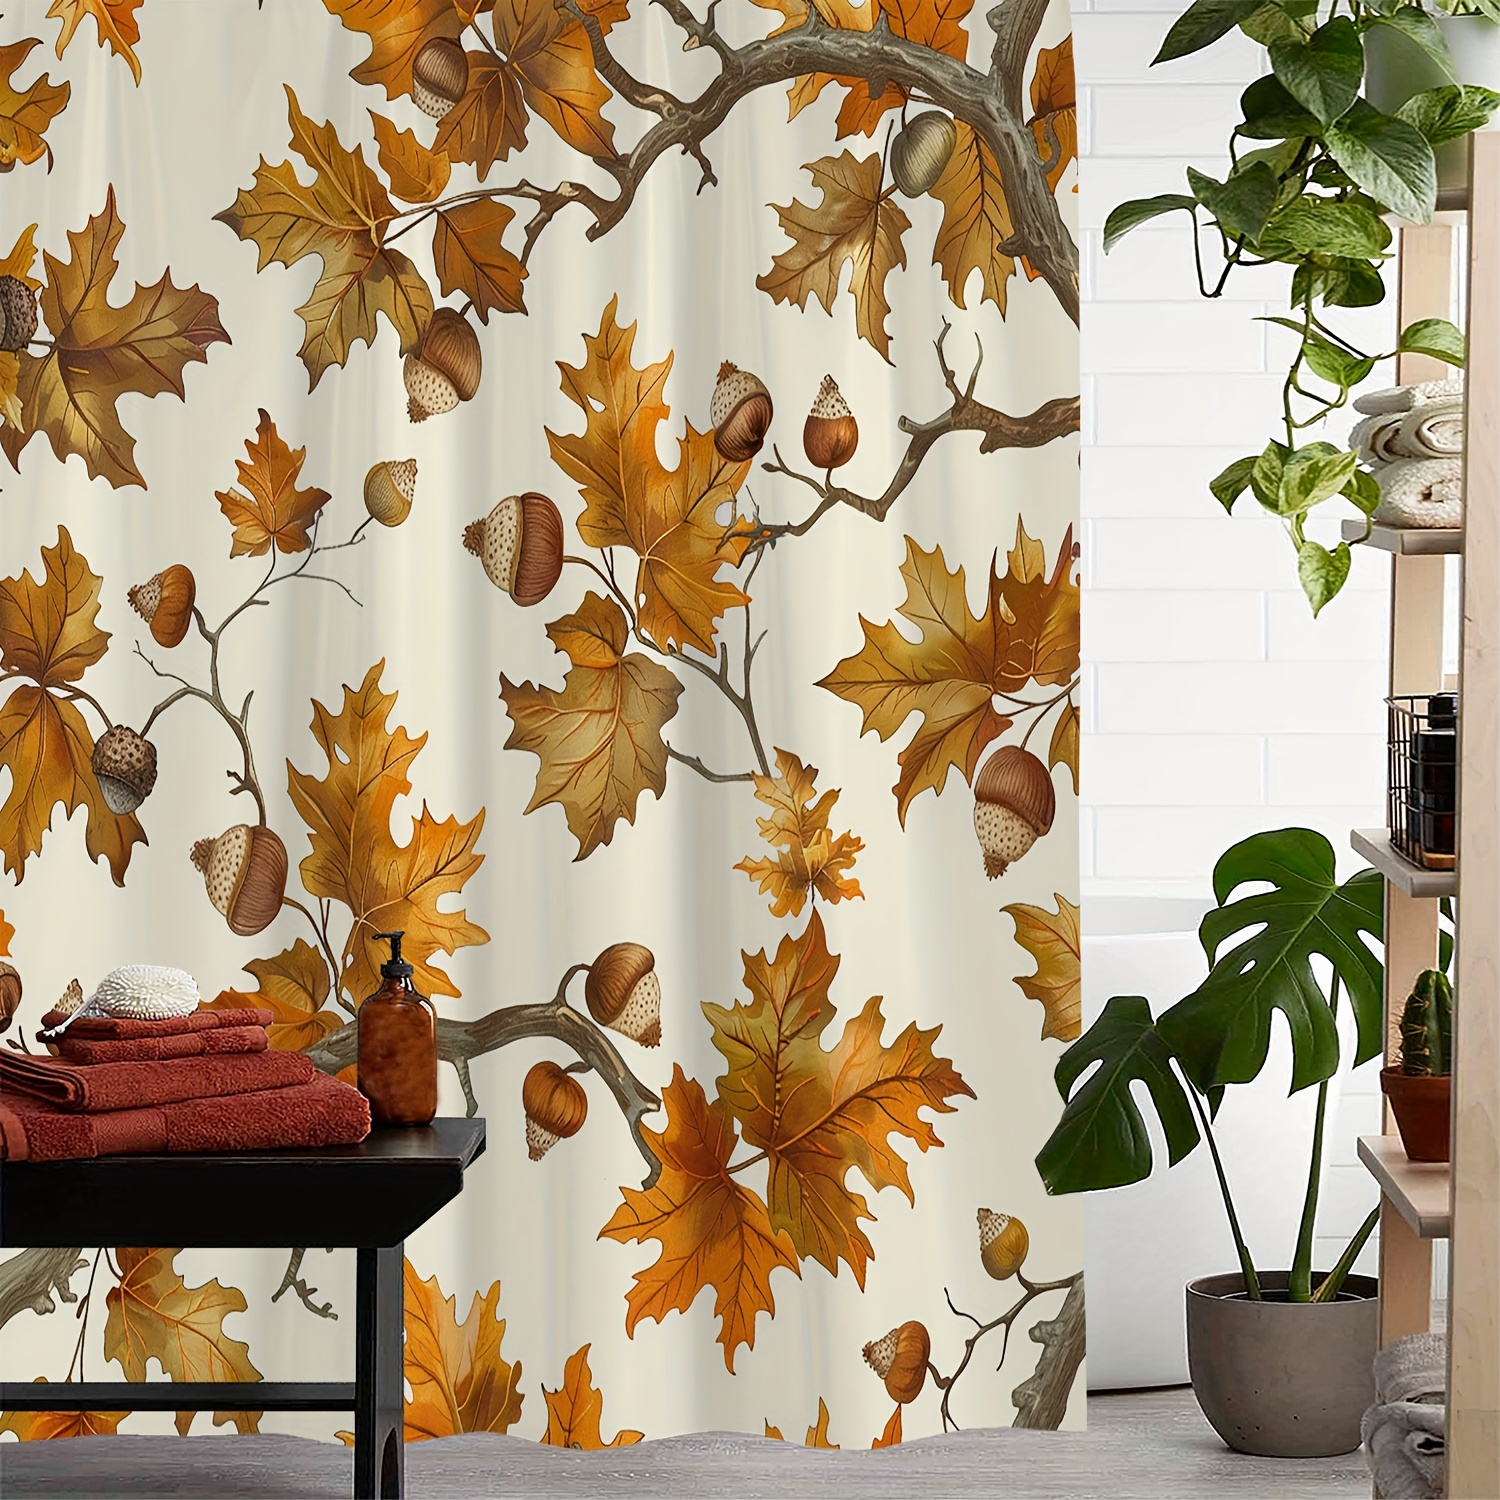 

Ultimate Waterproof Autumn Leaves And Acorns Shower Curtain With 12 Hooks - 72"x72" (183cmx183cm) - Machine Washable, Artistic Design, Viscose Fabric, Woven Construction